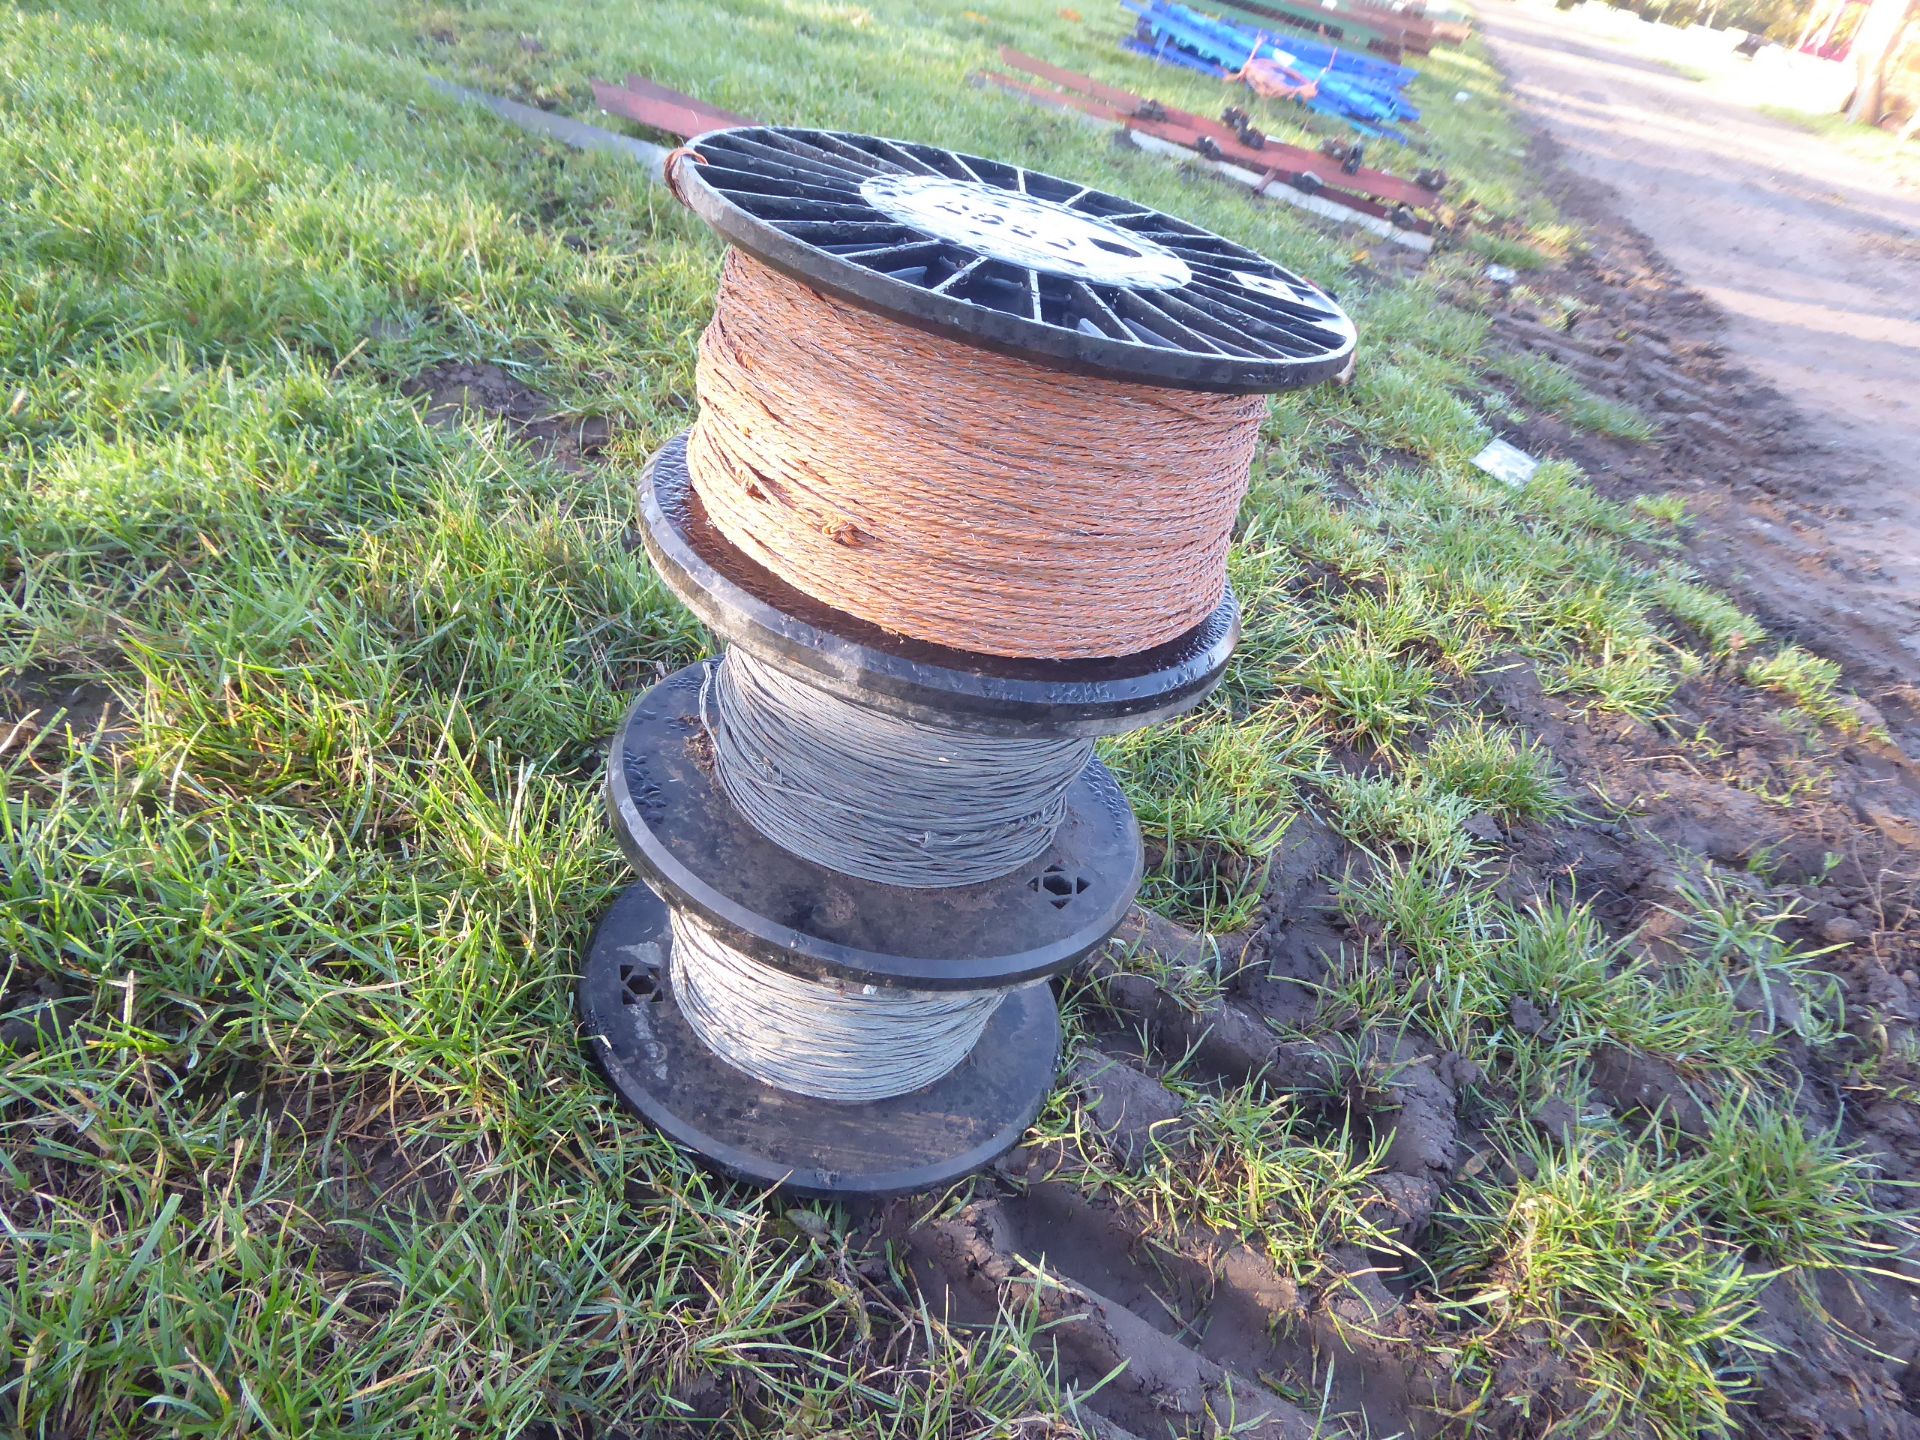 3 electric fencing wire reels